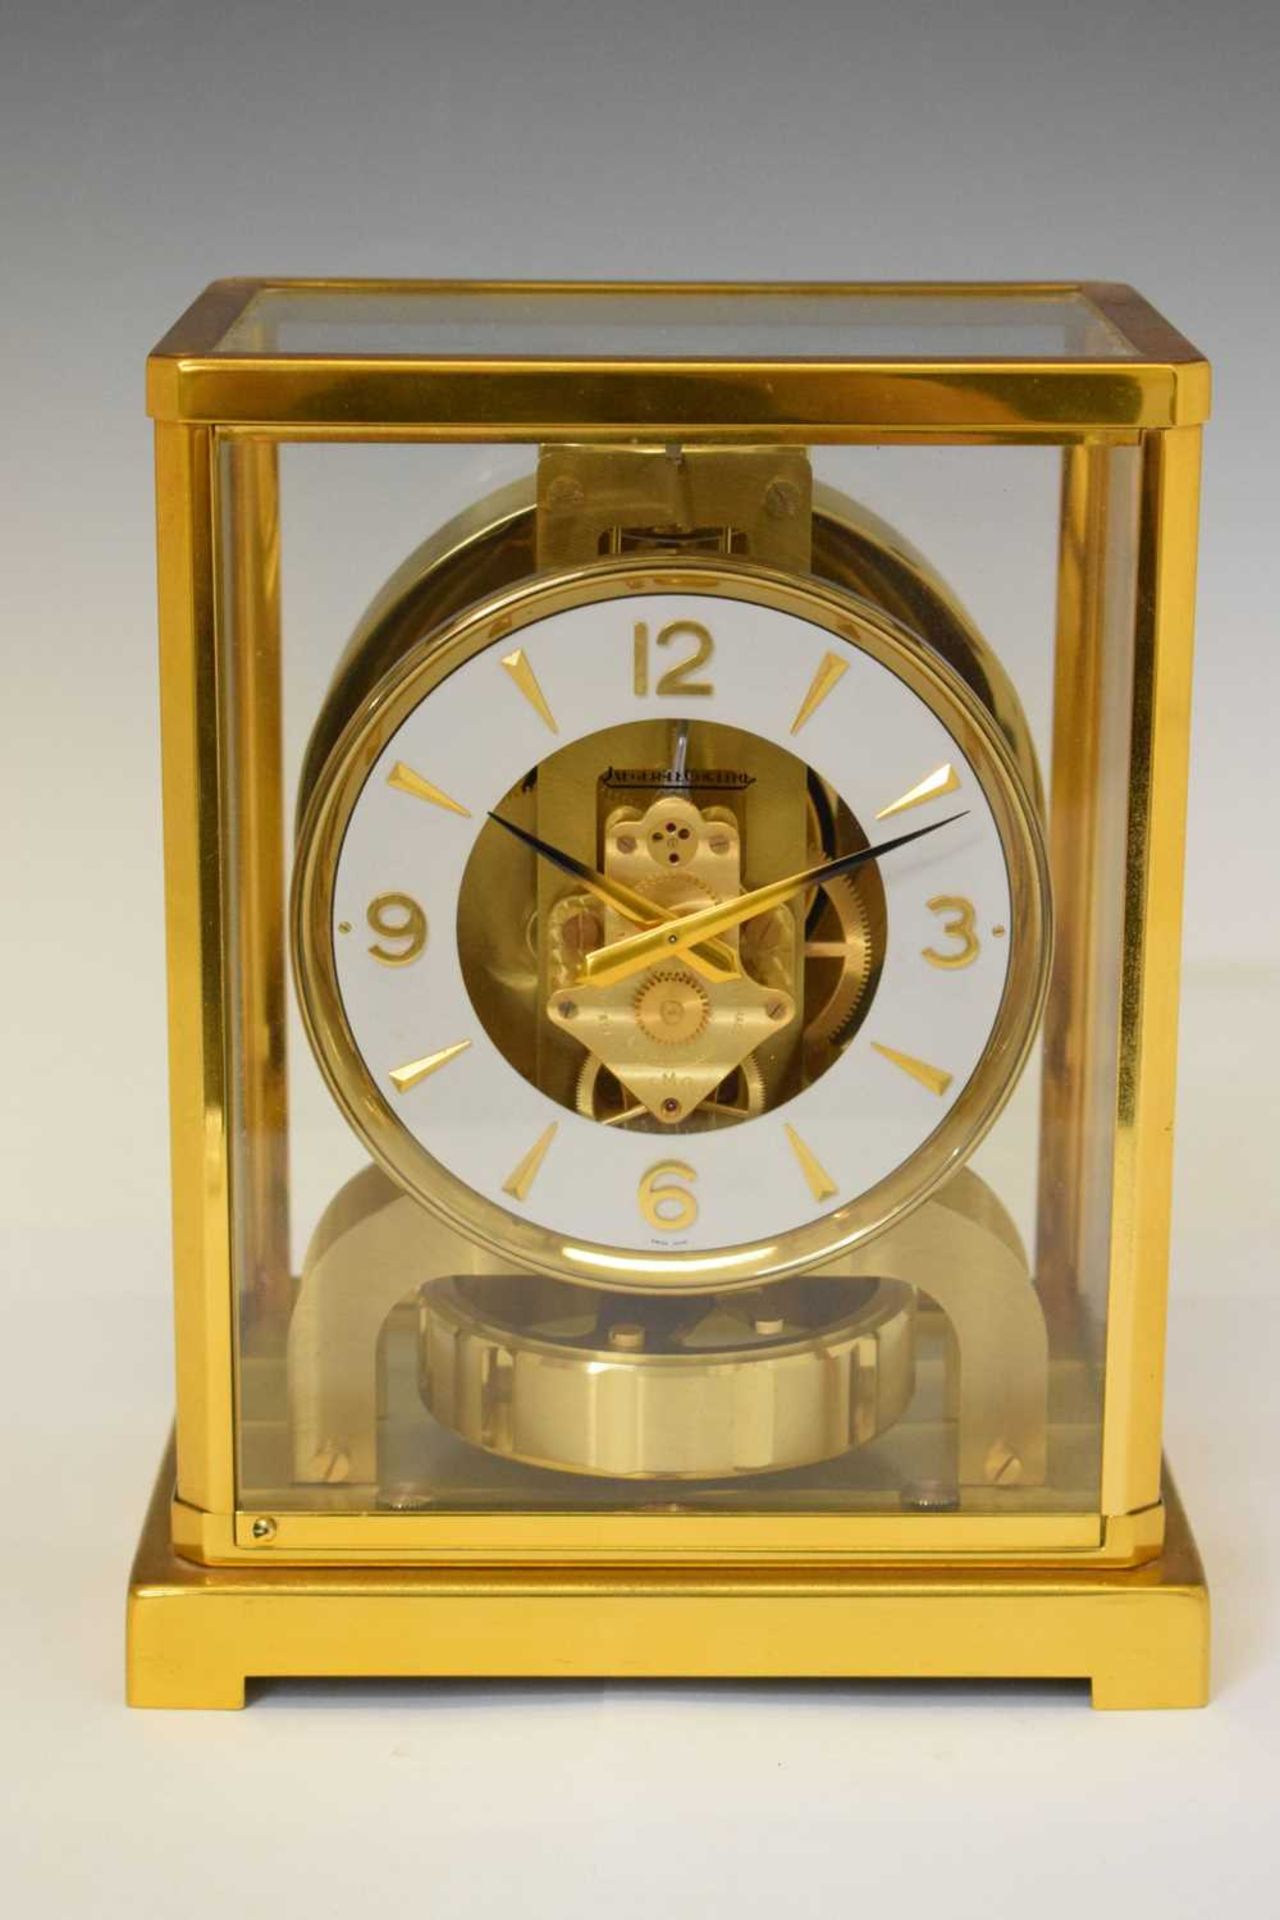 Jaeger Le Coultre Atmos clock - Image 2 of 9